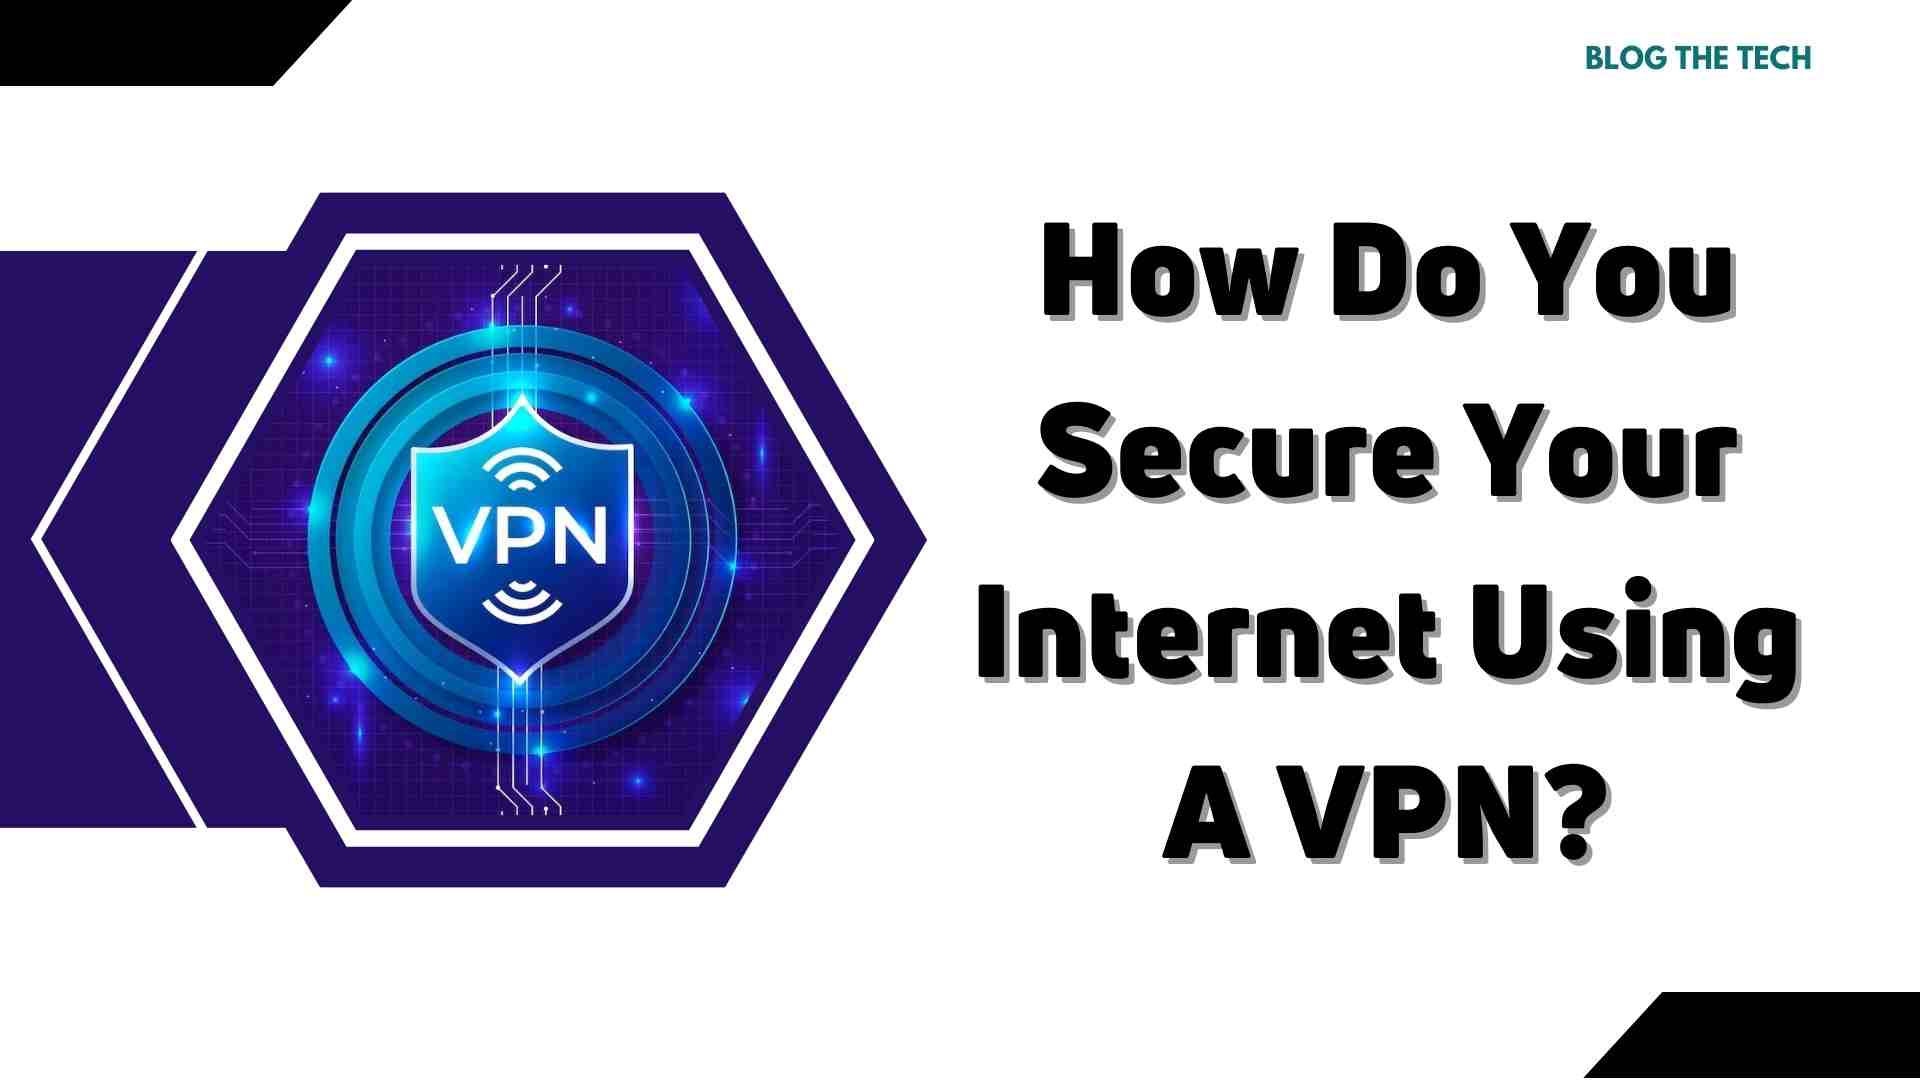 How Do You Secure Your Internet Using A VPN?